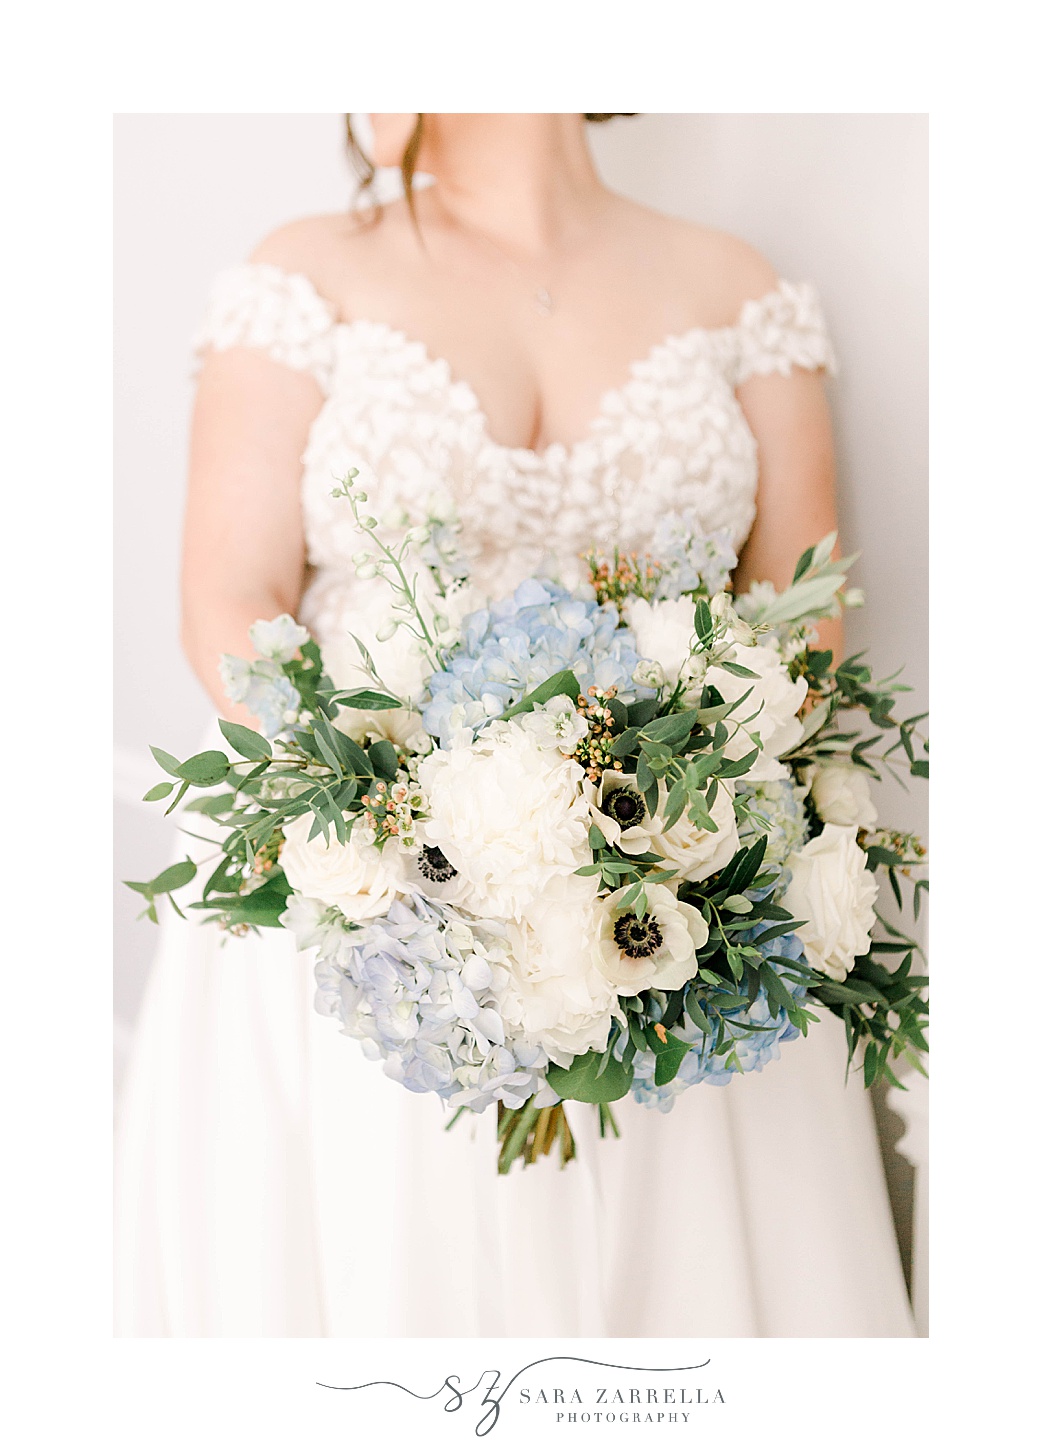 bride holds bouquet of blue and white flowers in off-the-shoulder lace wedding gown